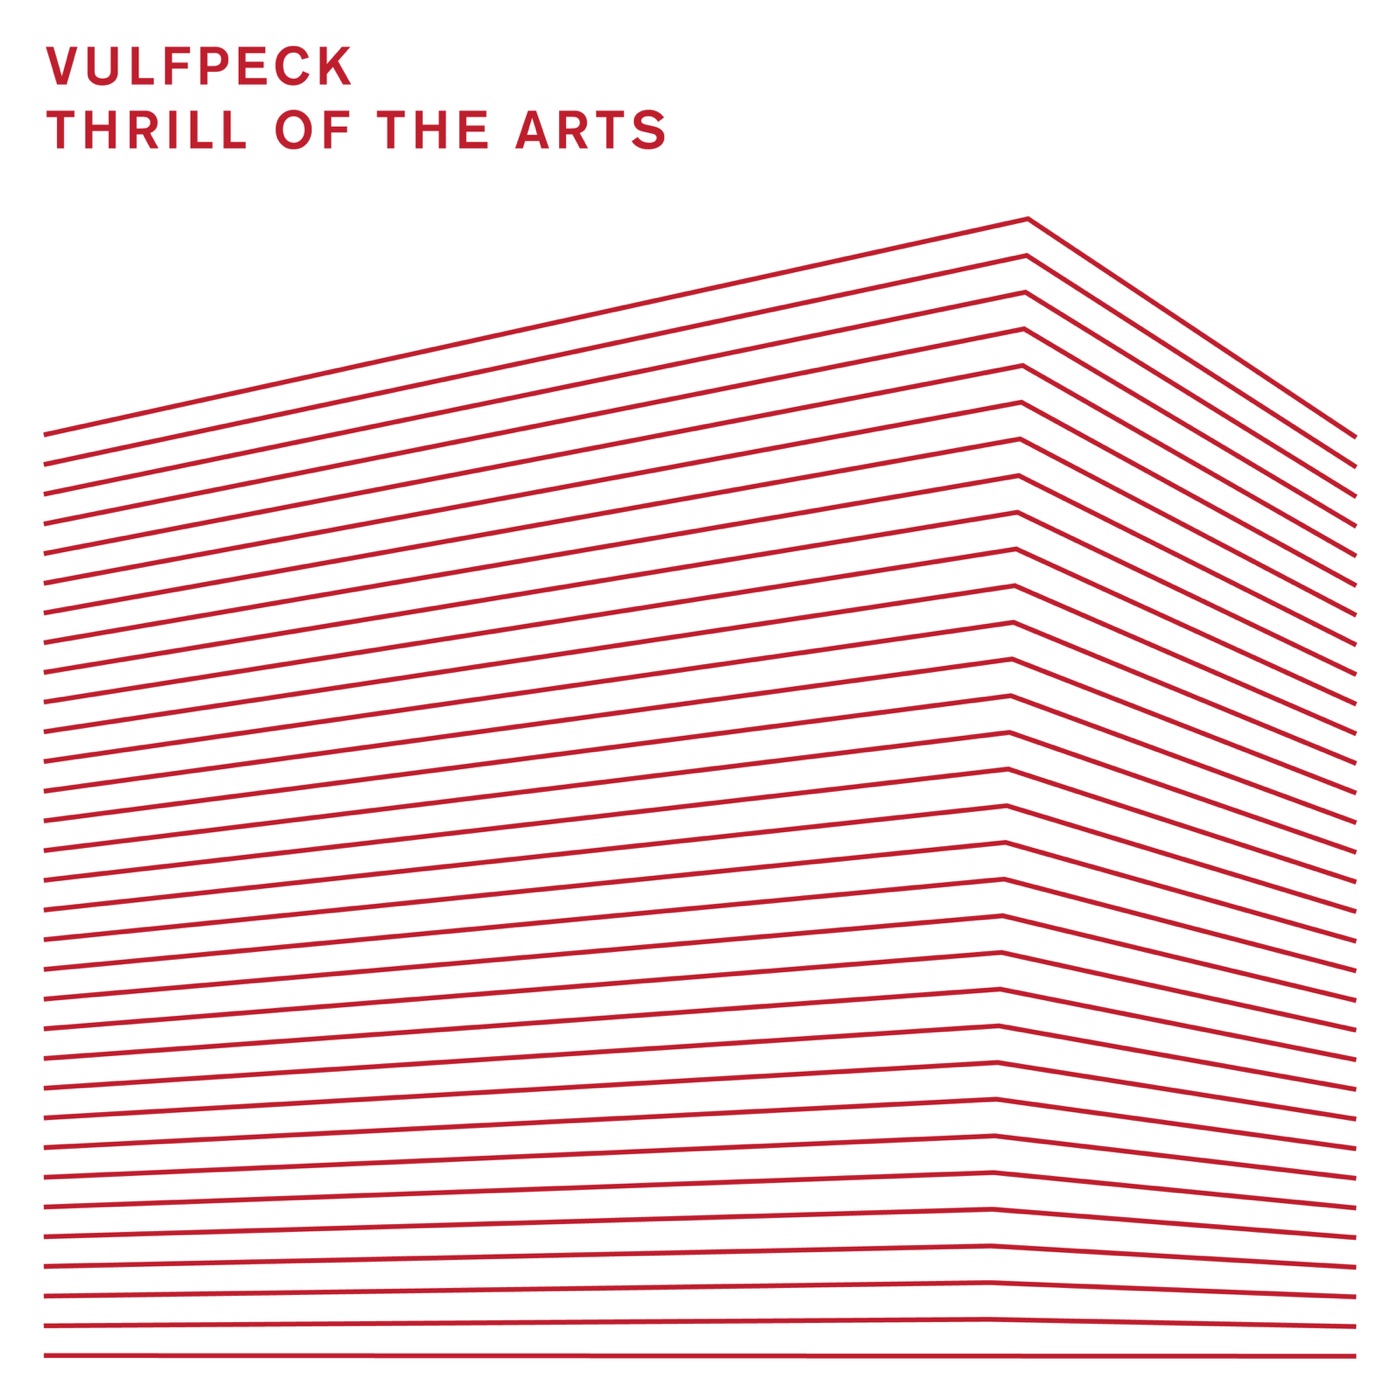 Thrill of the Arts by Vulfpeck